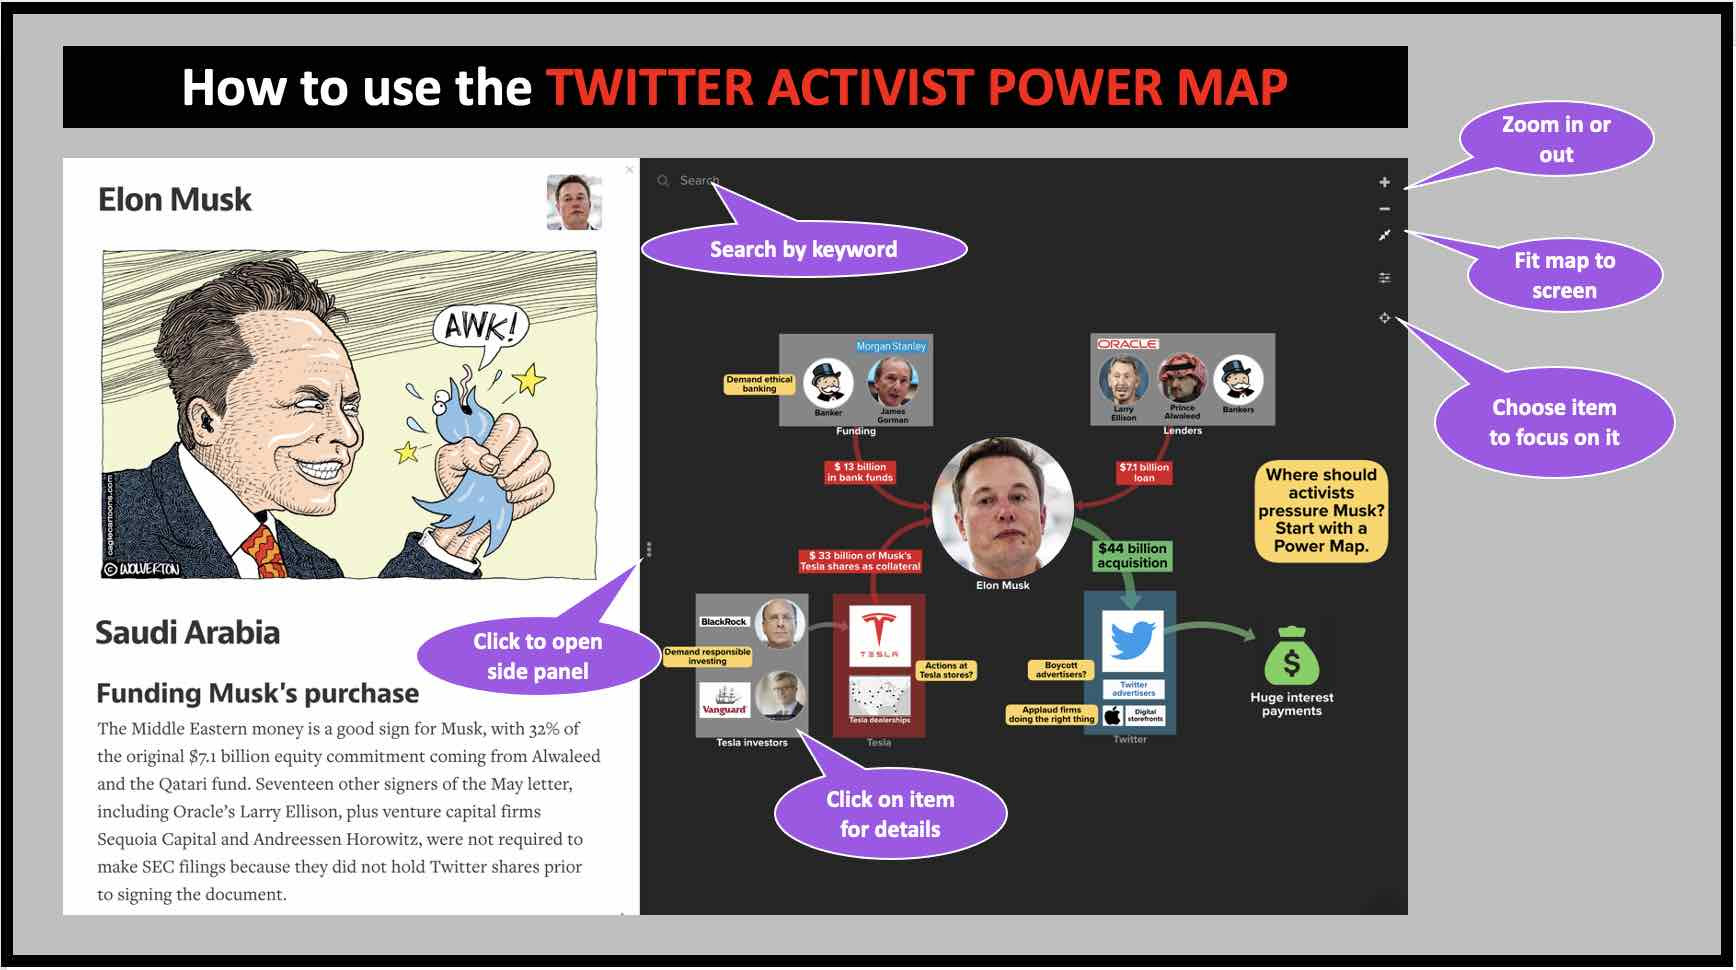 How to use the Twitter activist Power Map